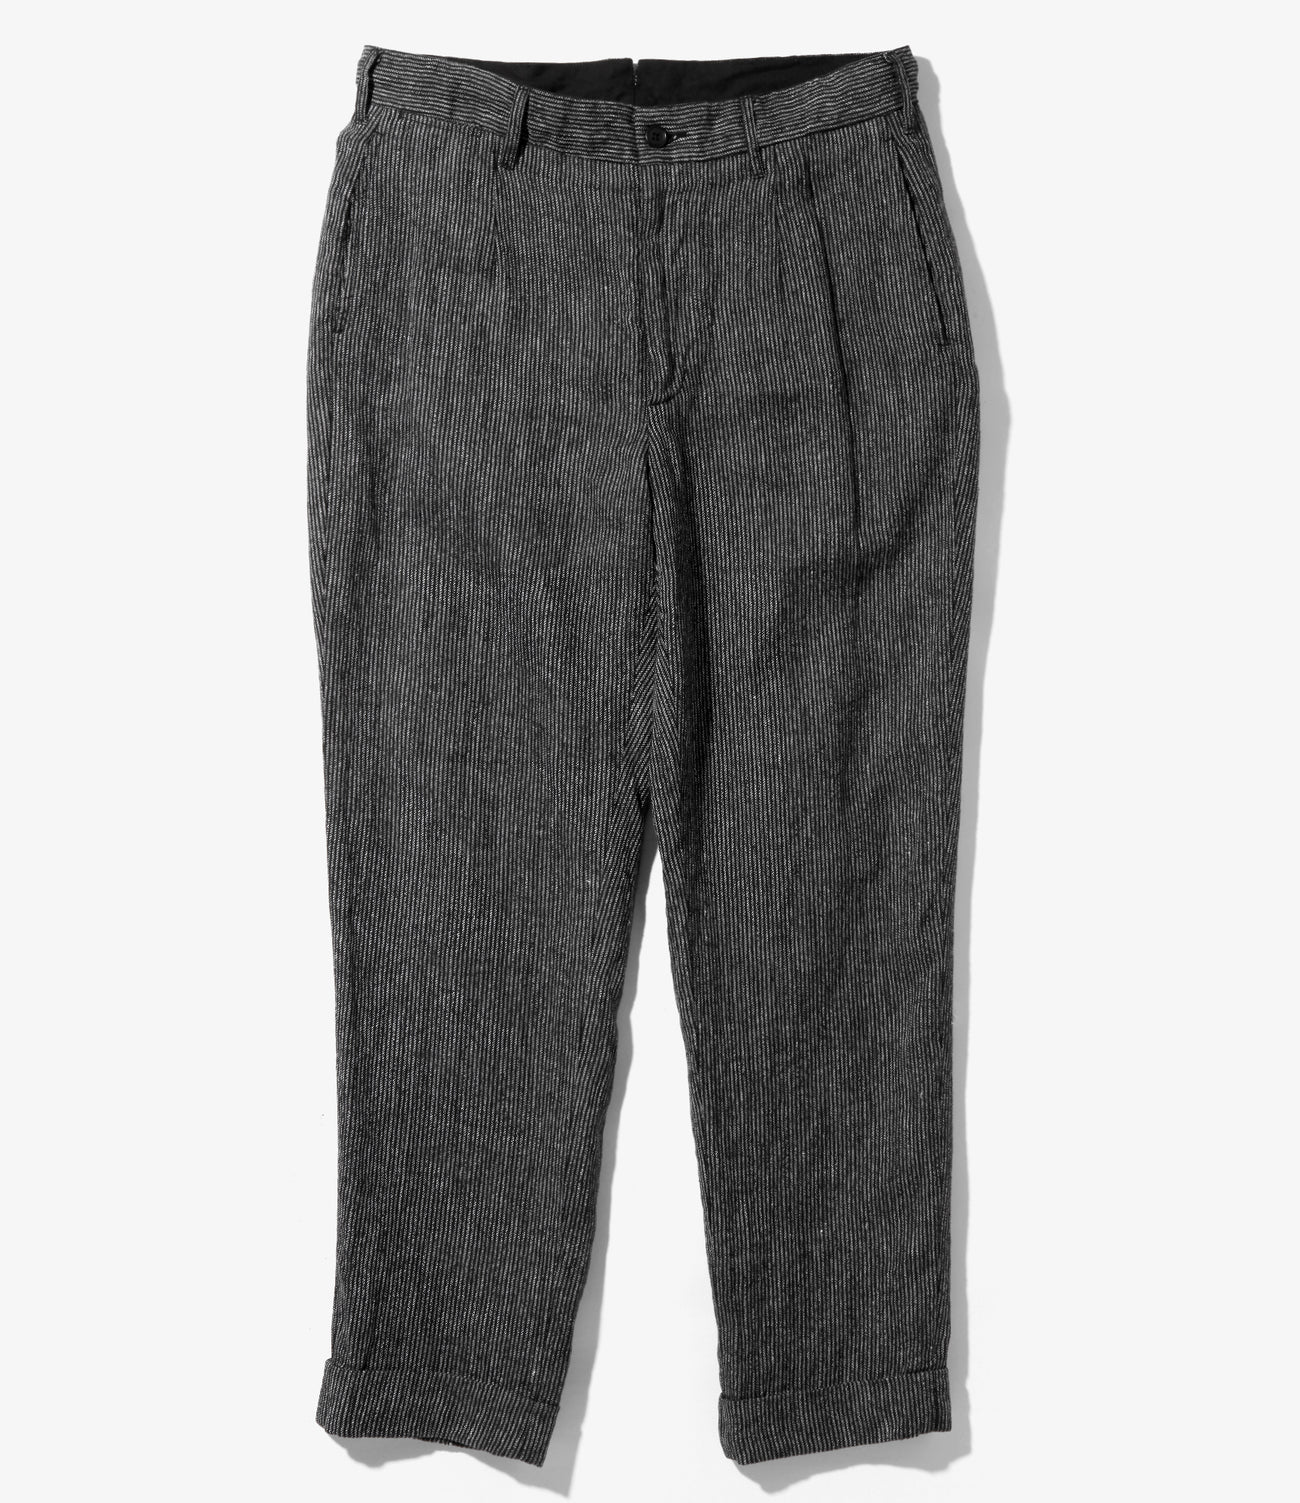 Andover Pant - Linen Stripe – NEPENTHES ONLINE STORE